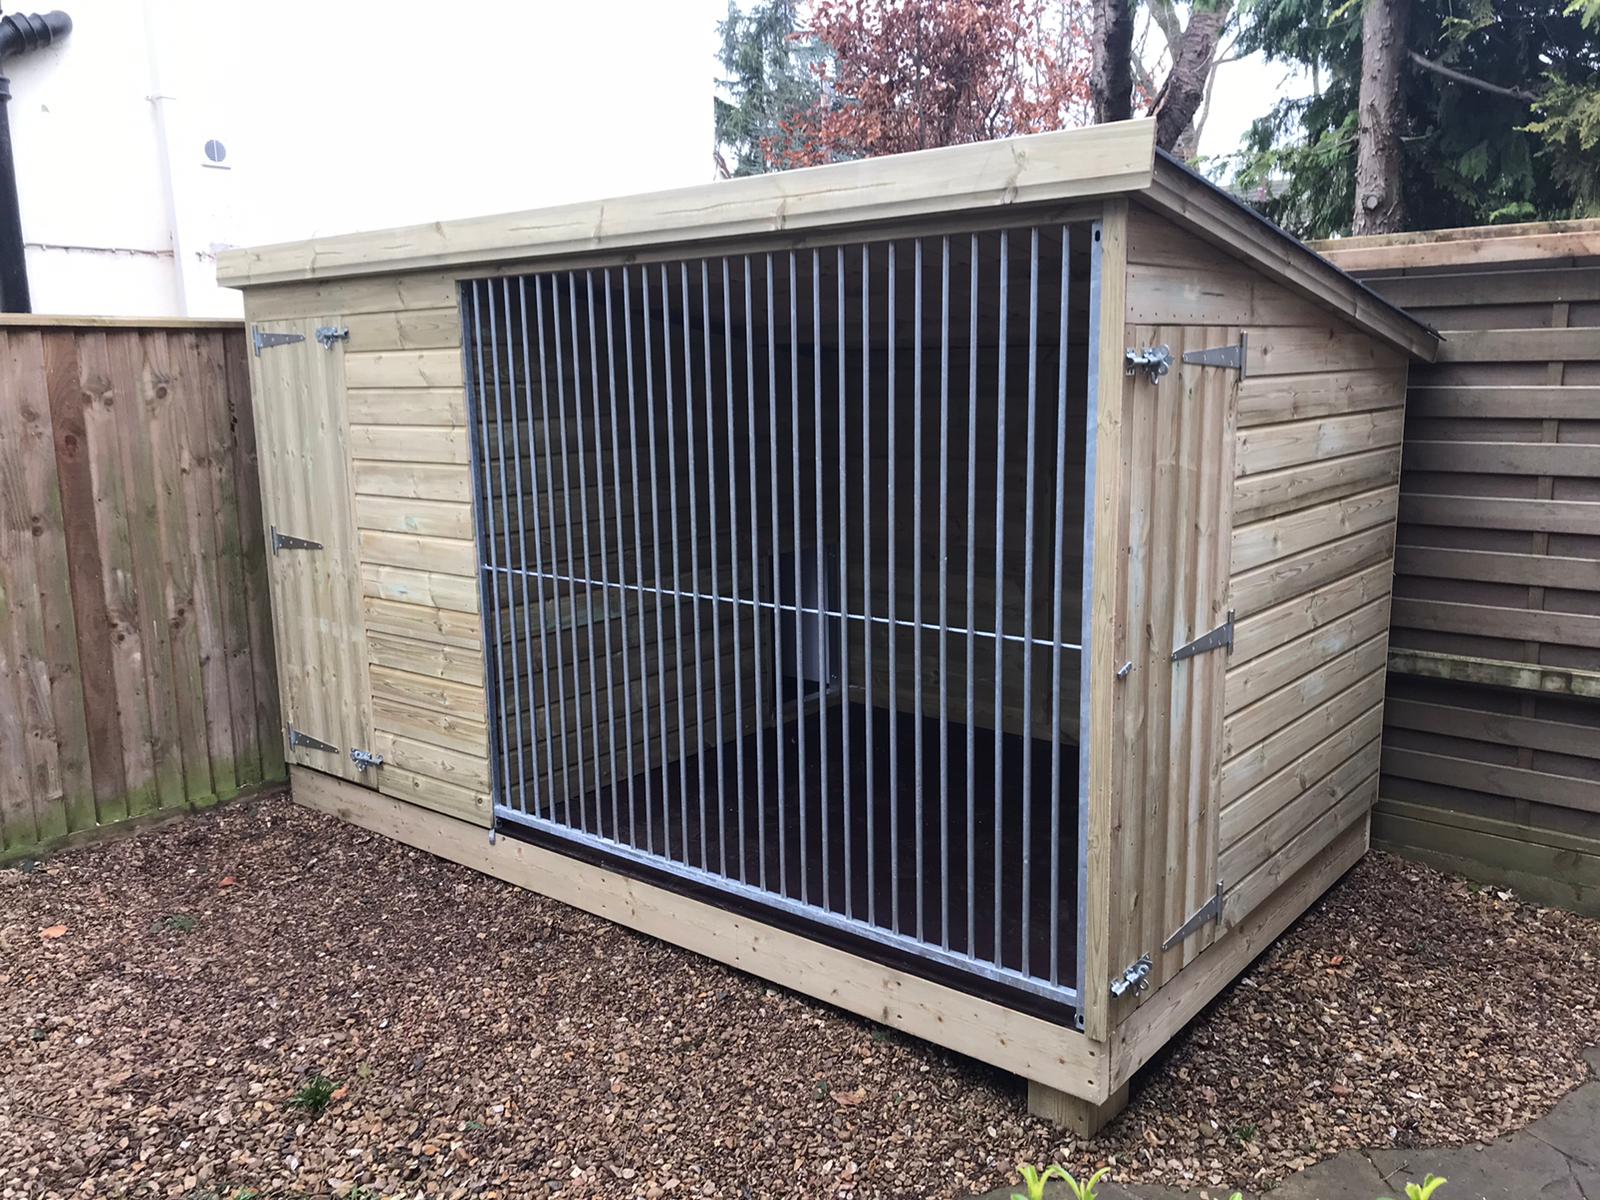 Ettiley Dog Kennel 12ft (wide) x 5ft (depth) x 5'7ft (high)